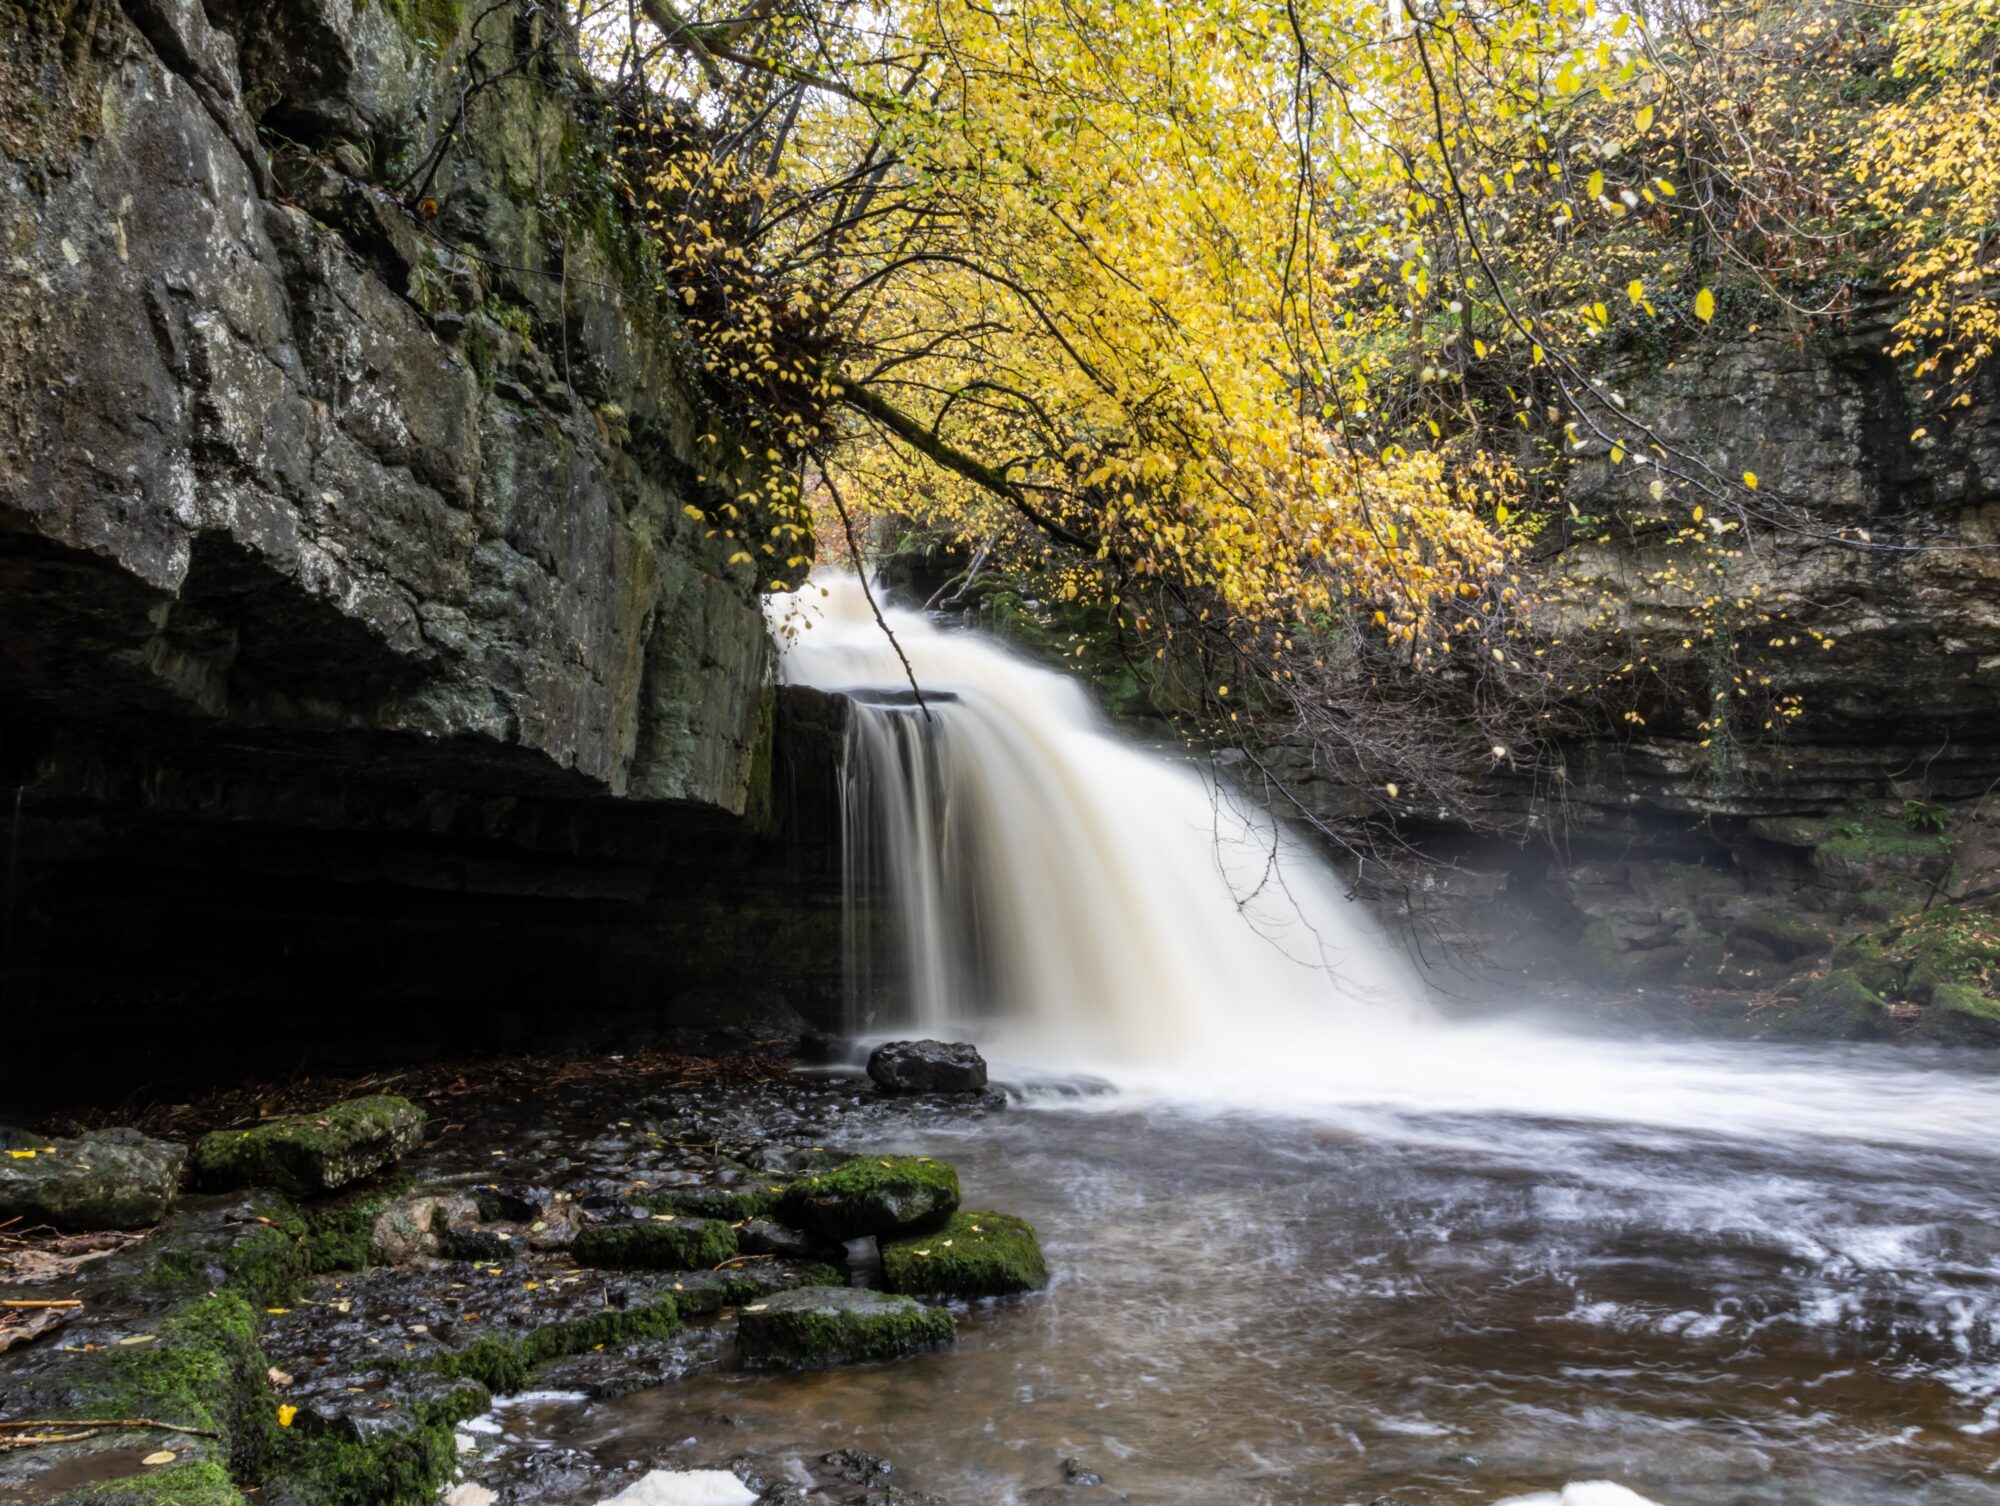 Image name west burton cauldron falls north yorkshire the 23 image from the post West Burton, North Yorkshire in Yorkshire.com.